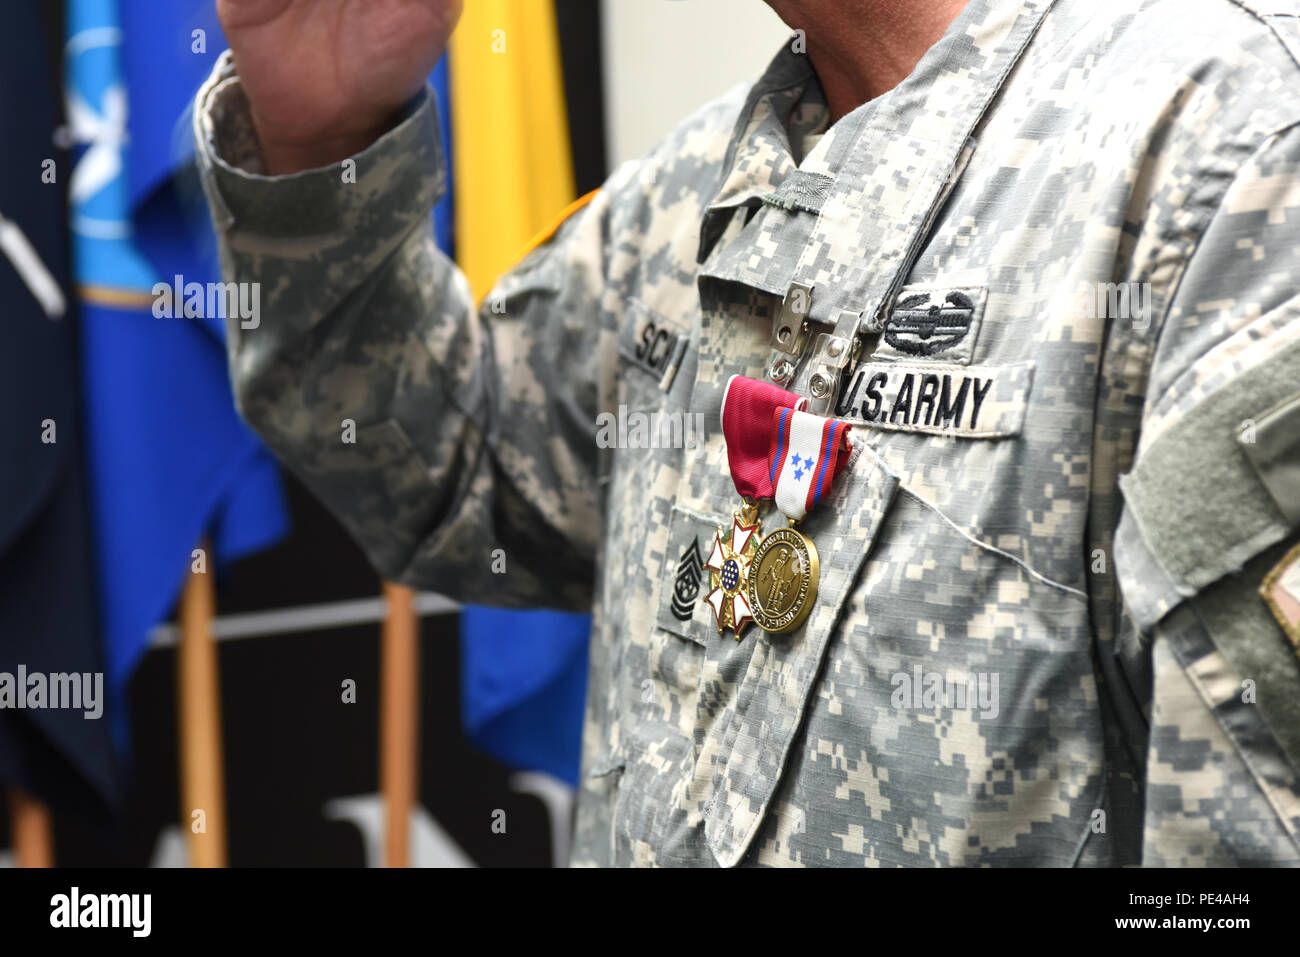 U.S. Army Brig. Gen. Giselle Wilz, NATO Headquarters Sarajevo commander, awards Command Sgt. Maj. Harley Schwind, NHQSa command senior enlisted leader, with the Legion of Merit Medal Sept. 7, 2015 at Camp Butmir in Sarajevo, Bosnia and Herzegovina. Schwind received the medal for exceptionally meritorious service to the North Dakota Army National Guard. He also received the state Legion of Merit Medal.  (U.S. Air Force photo by Master Sgt. JT May III) Stock Photo